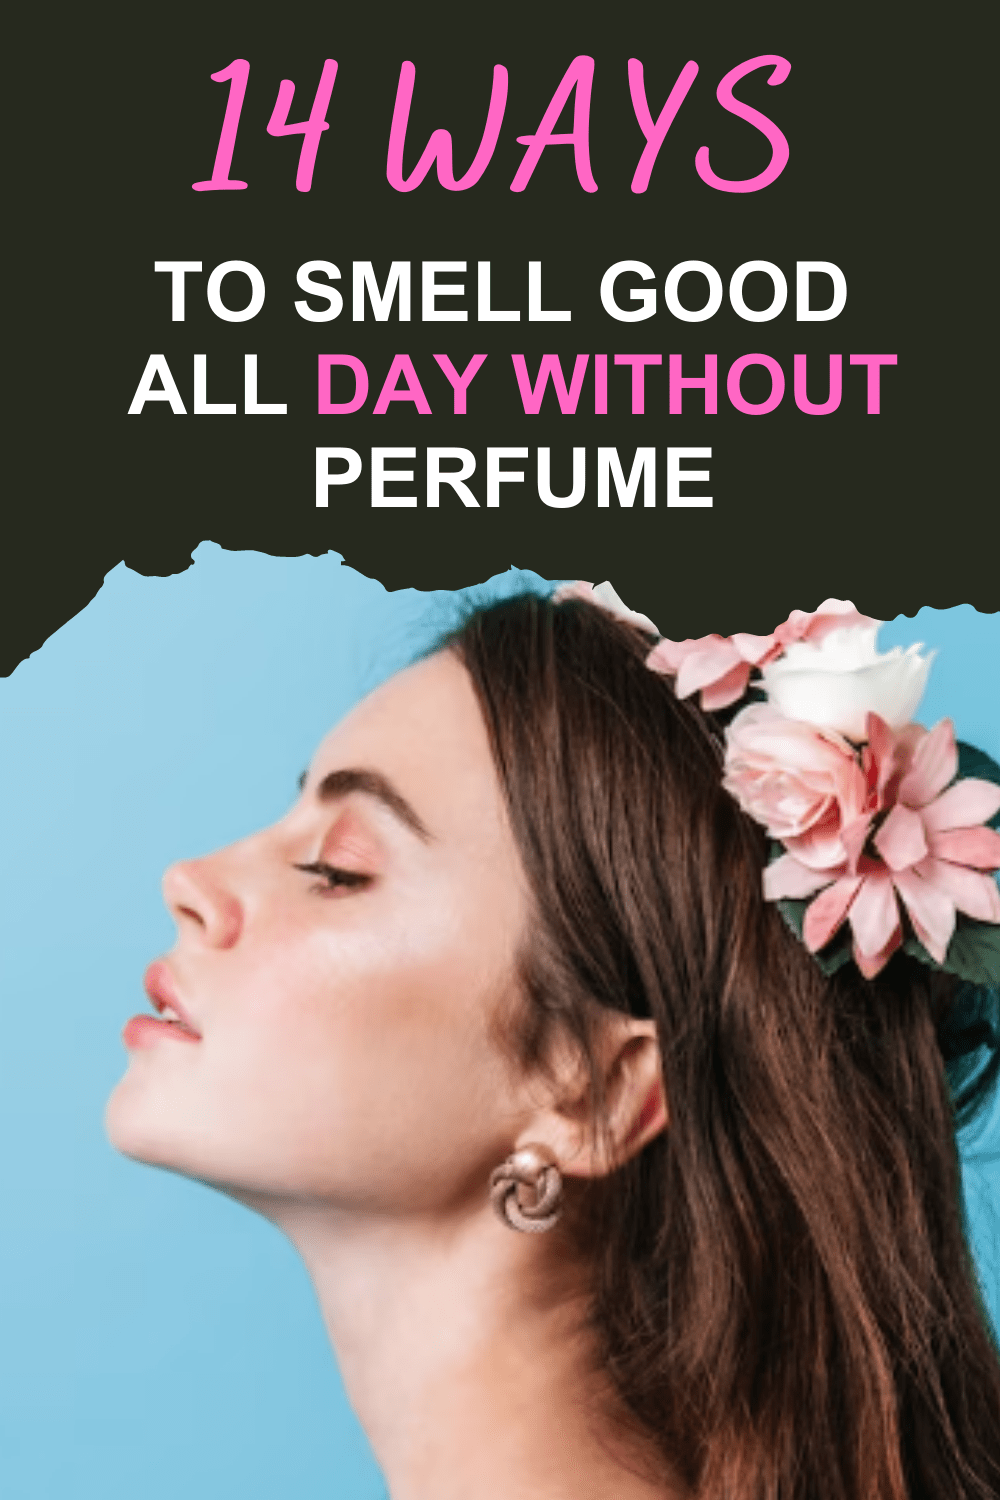 non-perfume ways to smell good, eliminating body odor naturally, staying odor-free without perfume, all-day freshness tips without perfume, how to stay fresh without using perfume, How to Smell Good All Day Without Perfume